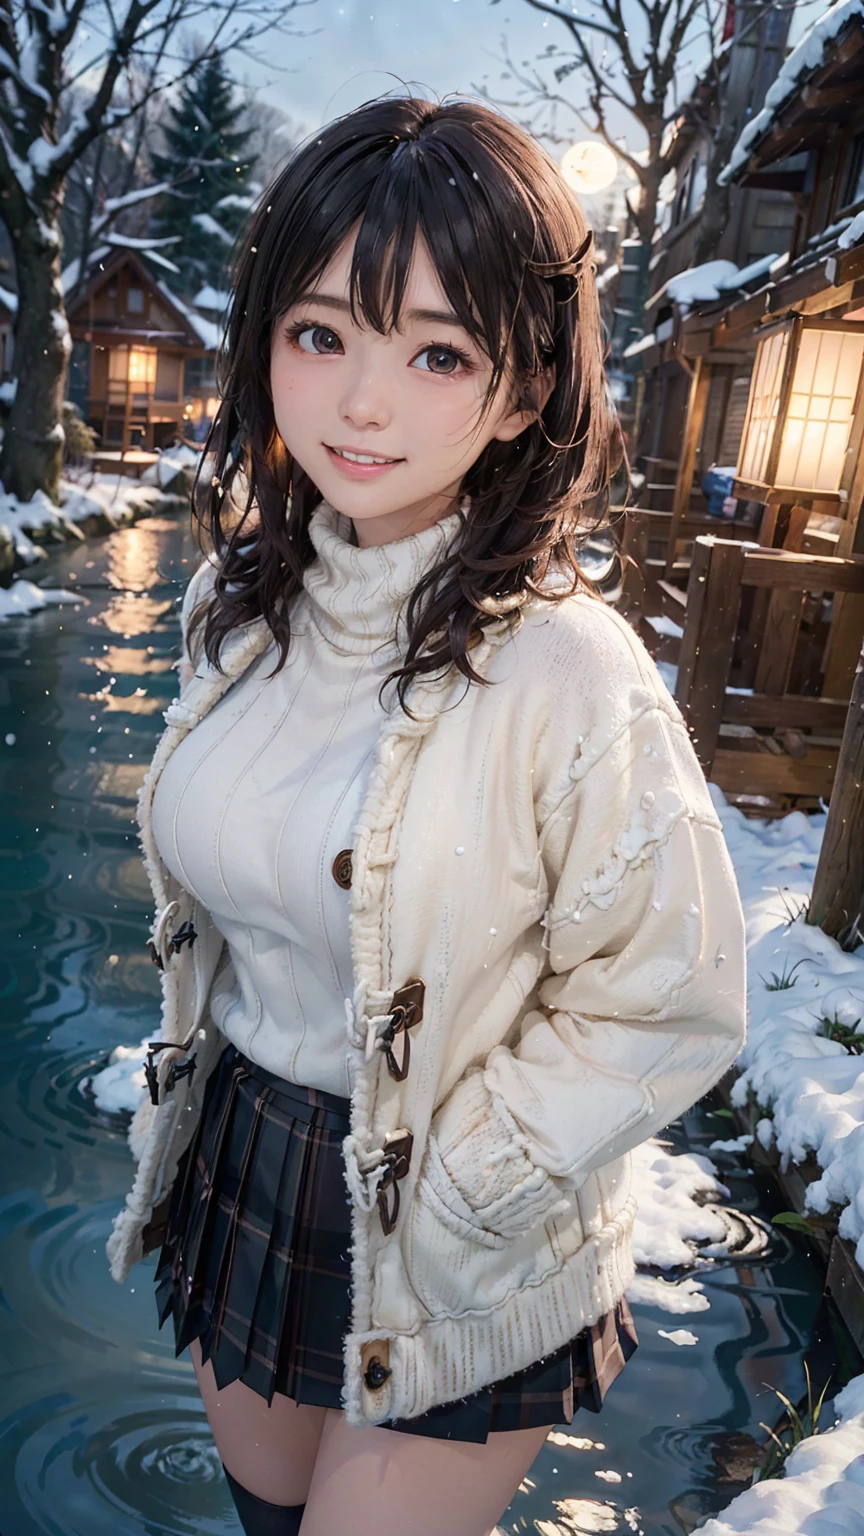 8K quality,(super masterpiece:1.3),highest quality,Detailed Images,The real picture,Natural lighting,symmetrical beauty,1 female,Japanese,20-year-old,(微smile,smile,smile),Medium Hair,Curly Hair,(very cute:1.3),Thick eyebrows,(Double:1.2),(Realistic eyes:1.1),clothing(Duffle coat,Turtleneck sweater,skirt,stockings),(The background is a lake,Walking on Water,Night view,winter,snow,full moon,Starry Sky),(Face directly towards the camera,Looking directly at the viewer,looking at the camera,The body faces the viewer,The body is facing the direction of the camera,Face looking straight into the camera).